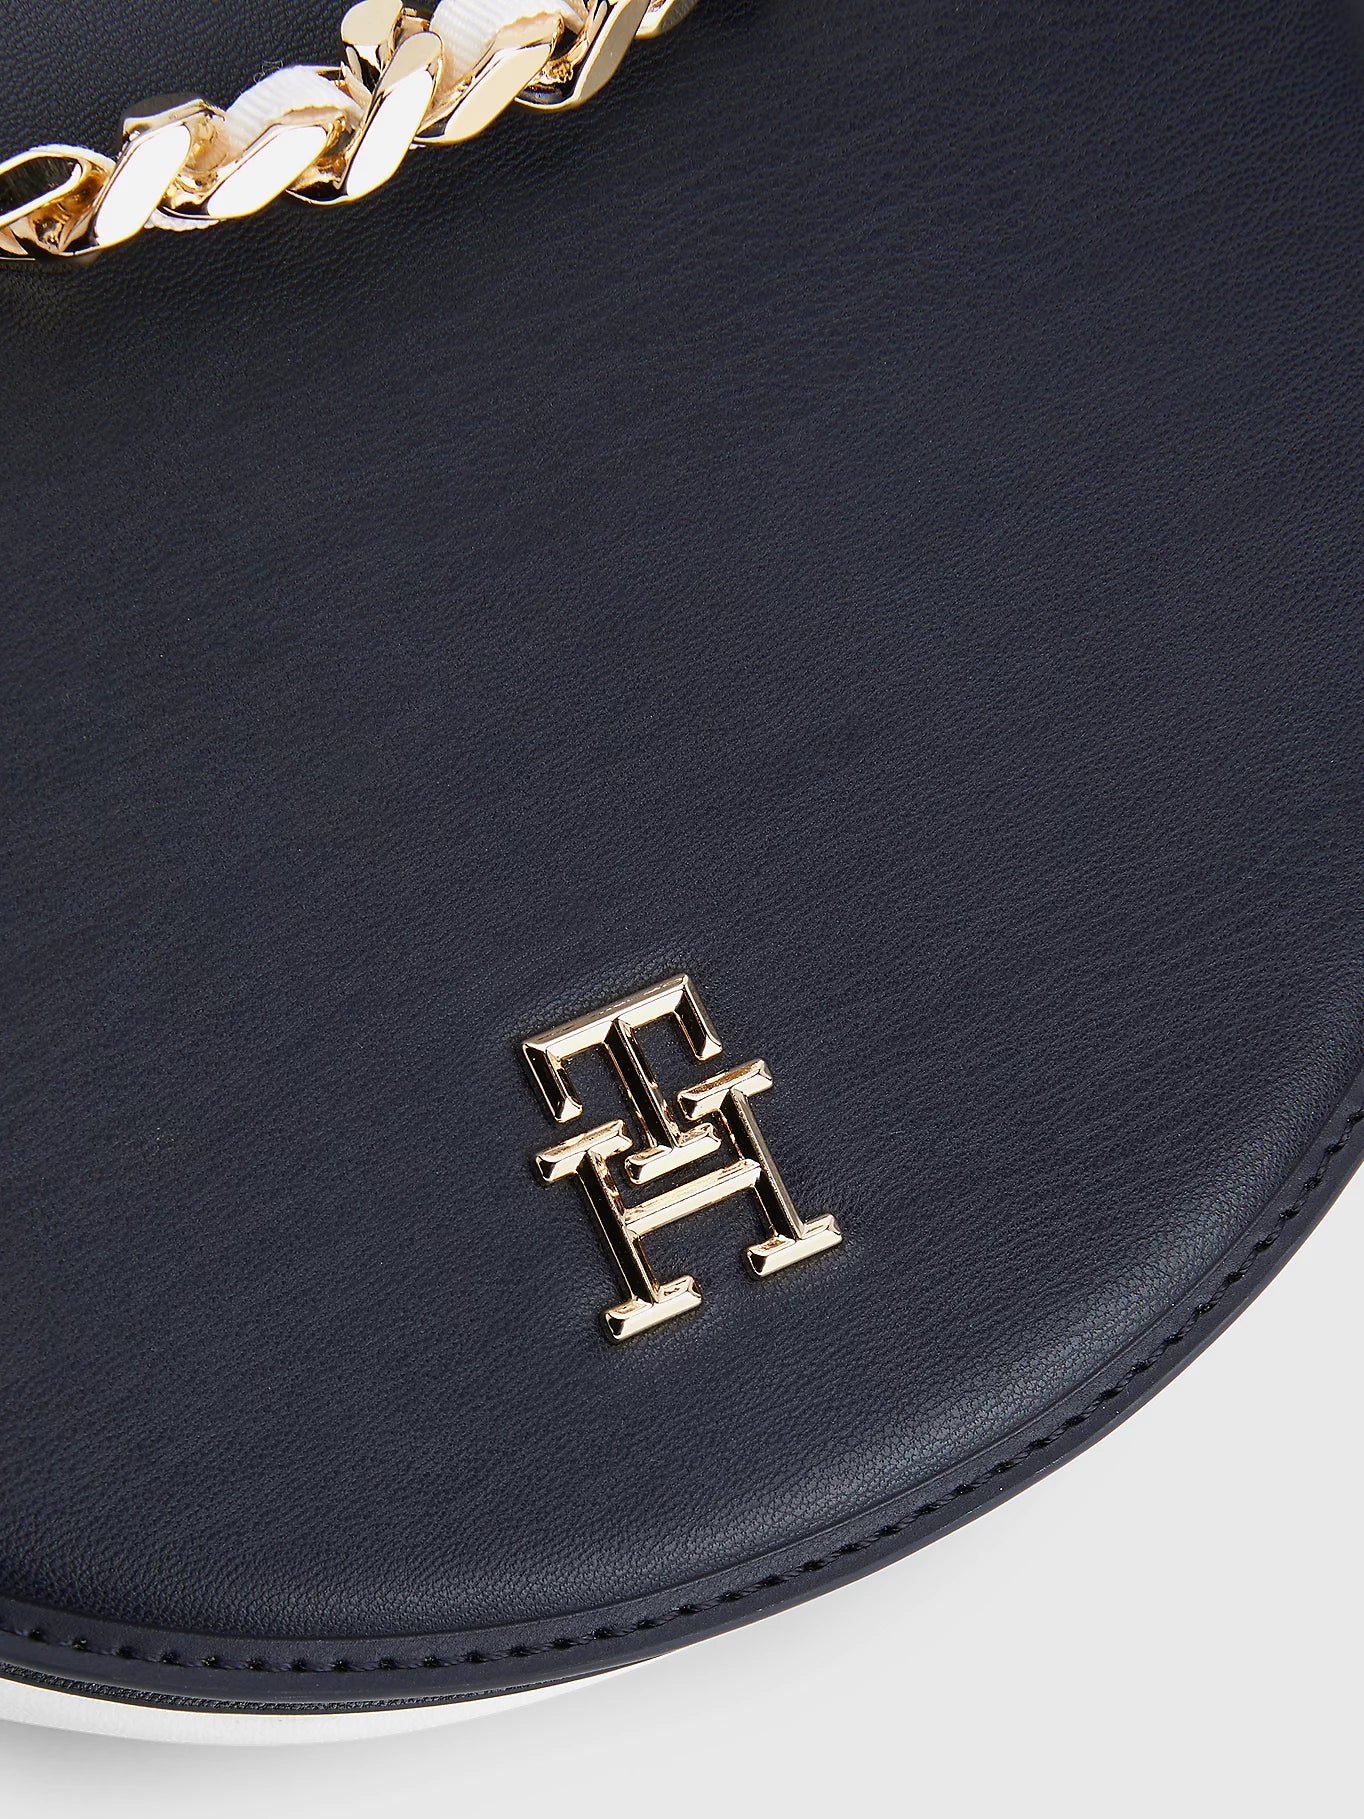 Tommy Hilfiger Saddle Bag in Navy and White